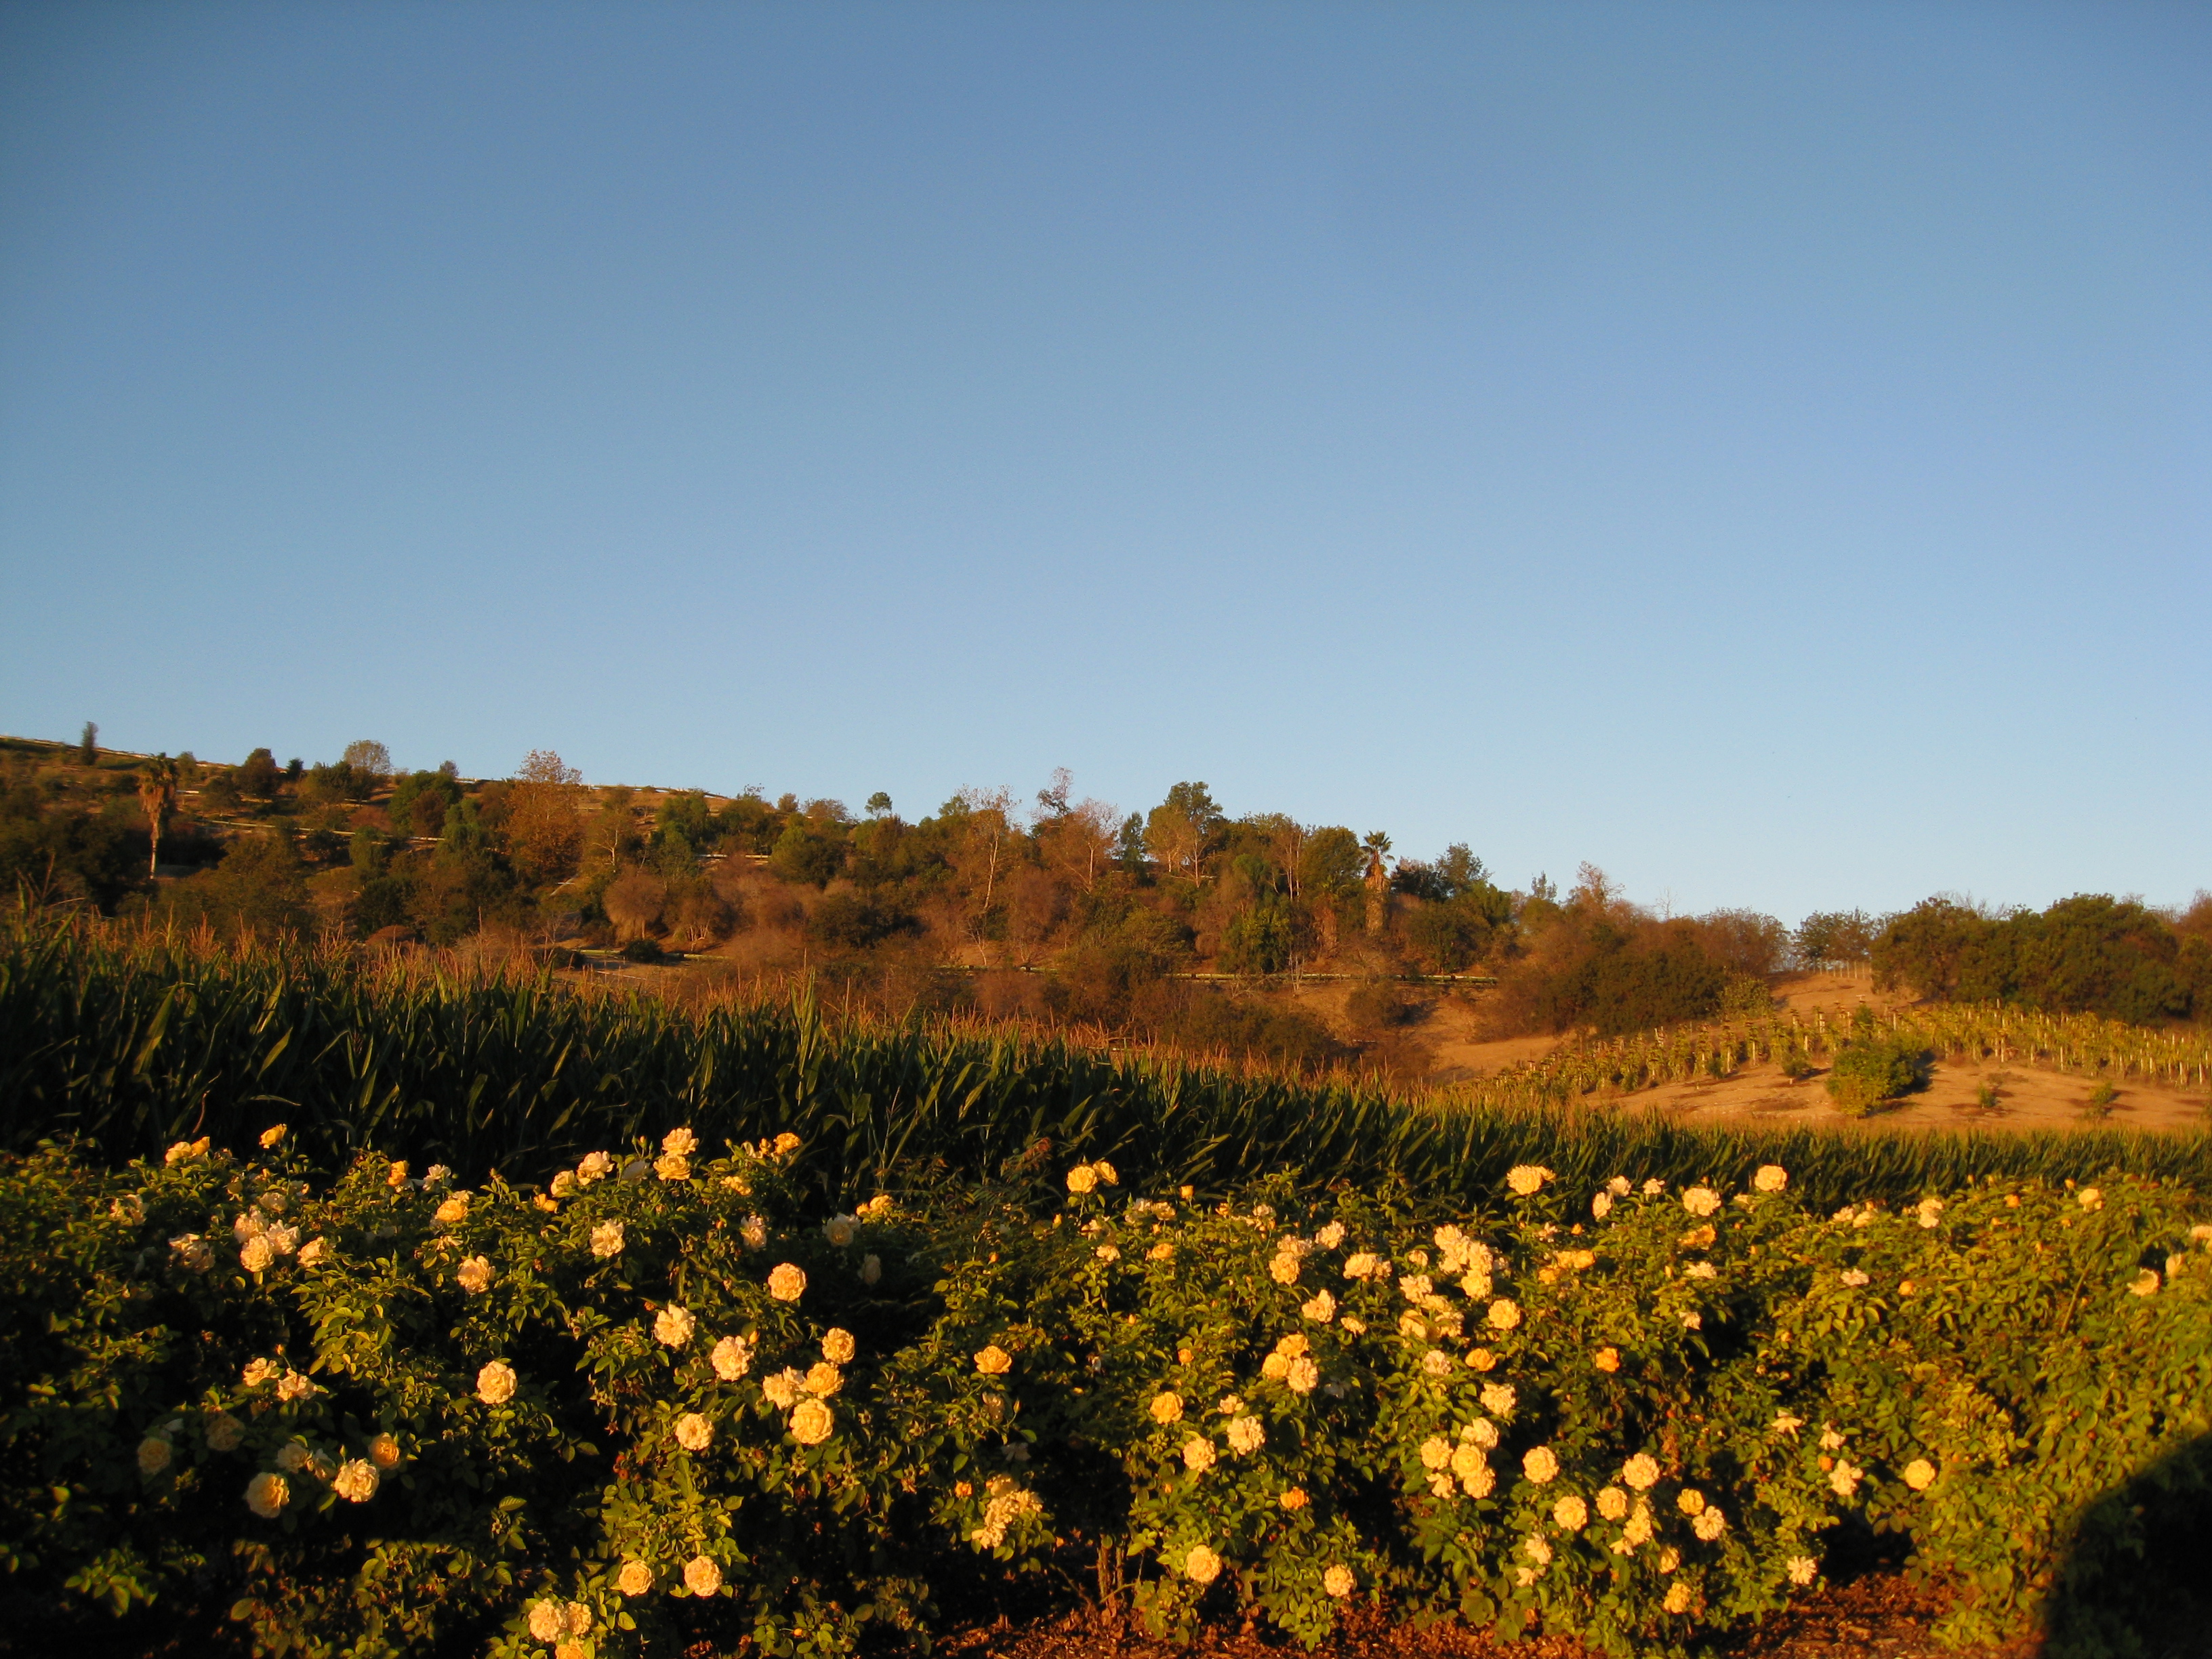 Corn grows tall behind a border of yellow roses. 